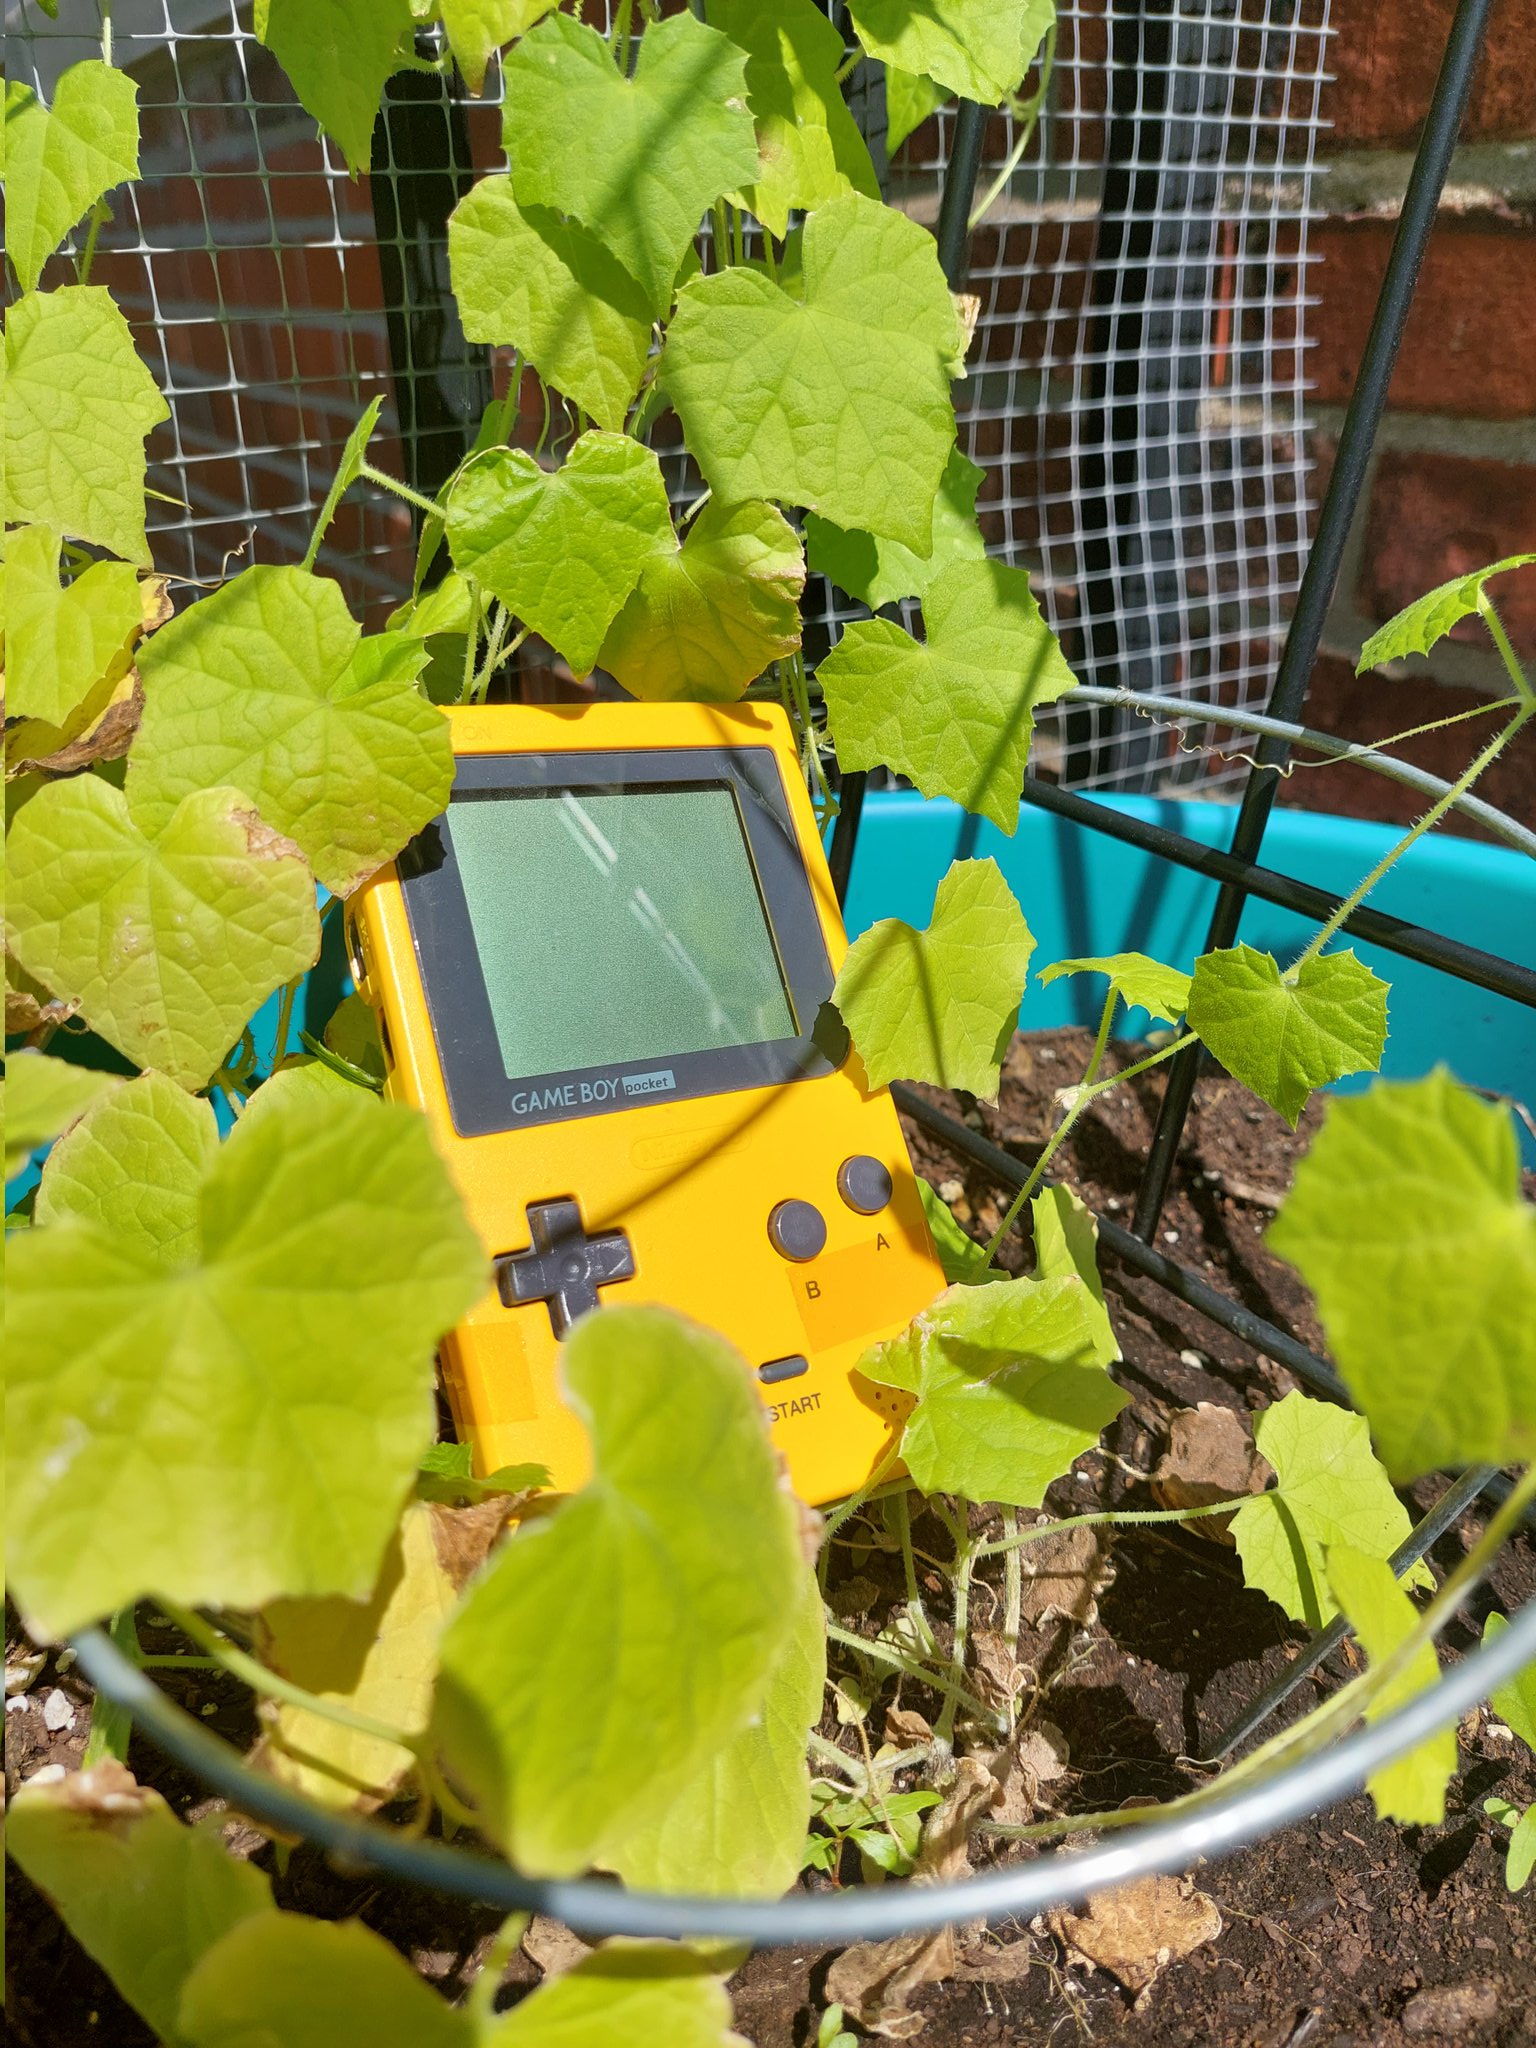 A solar powered game boy sitting amidst some plants